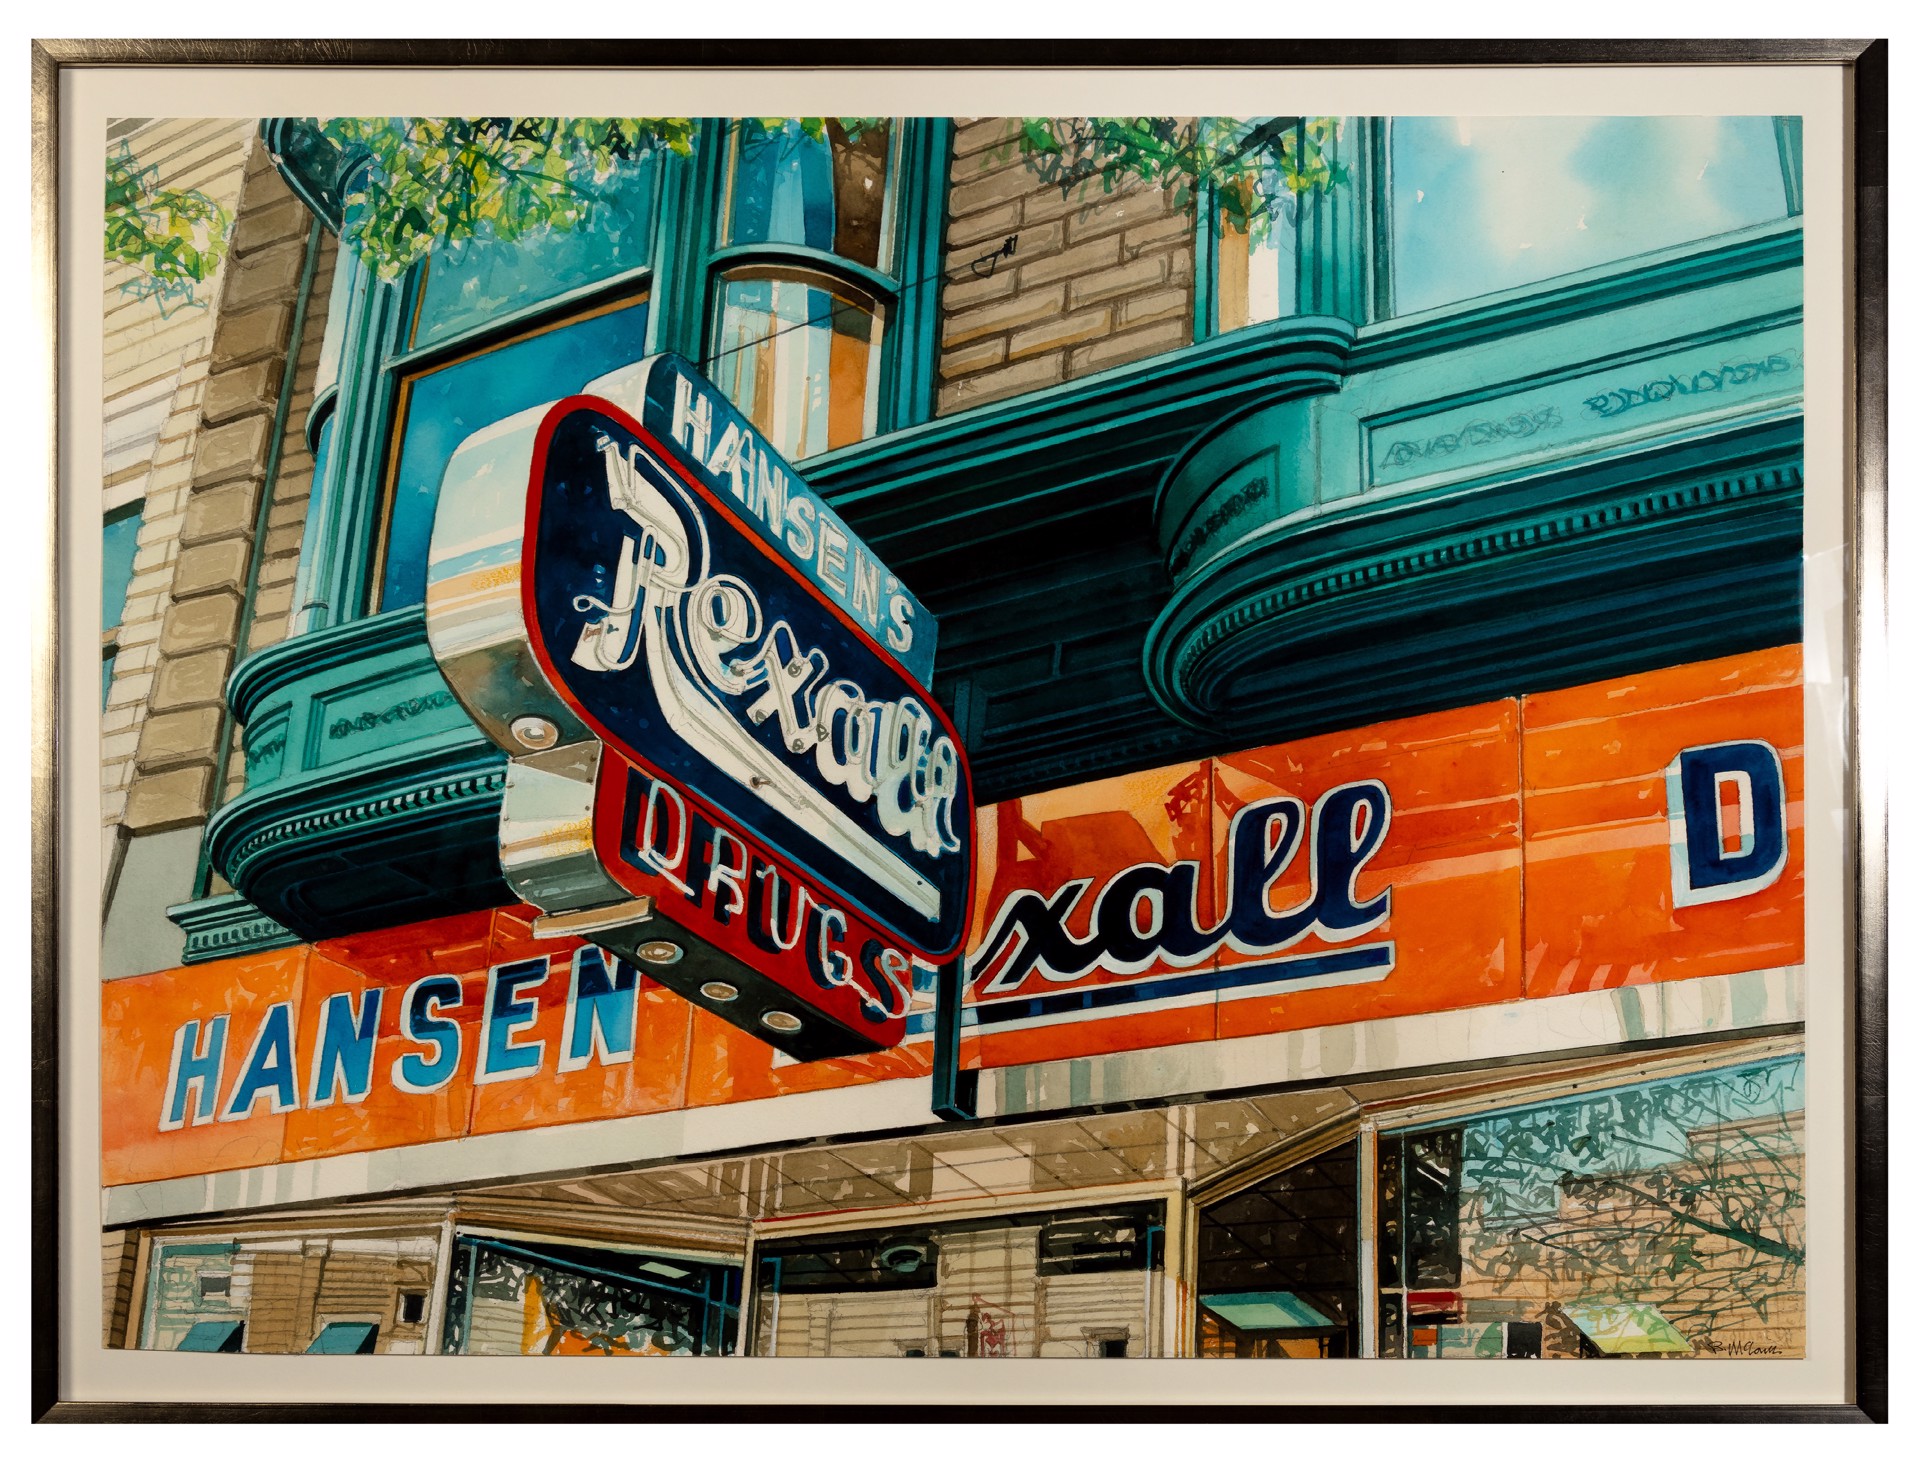 Hansen's Rexall Drugs by Bruce McCombs